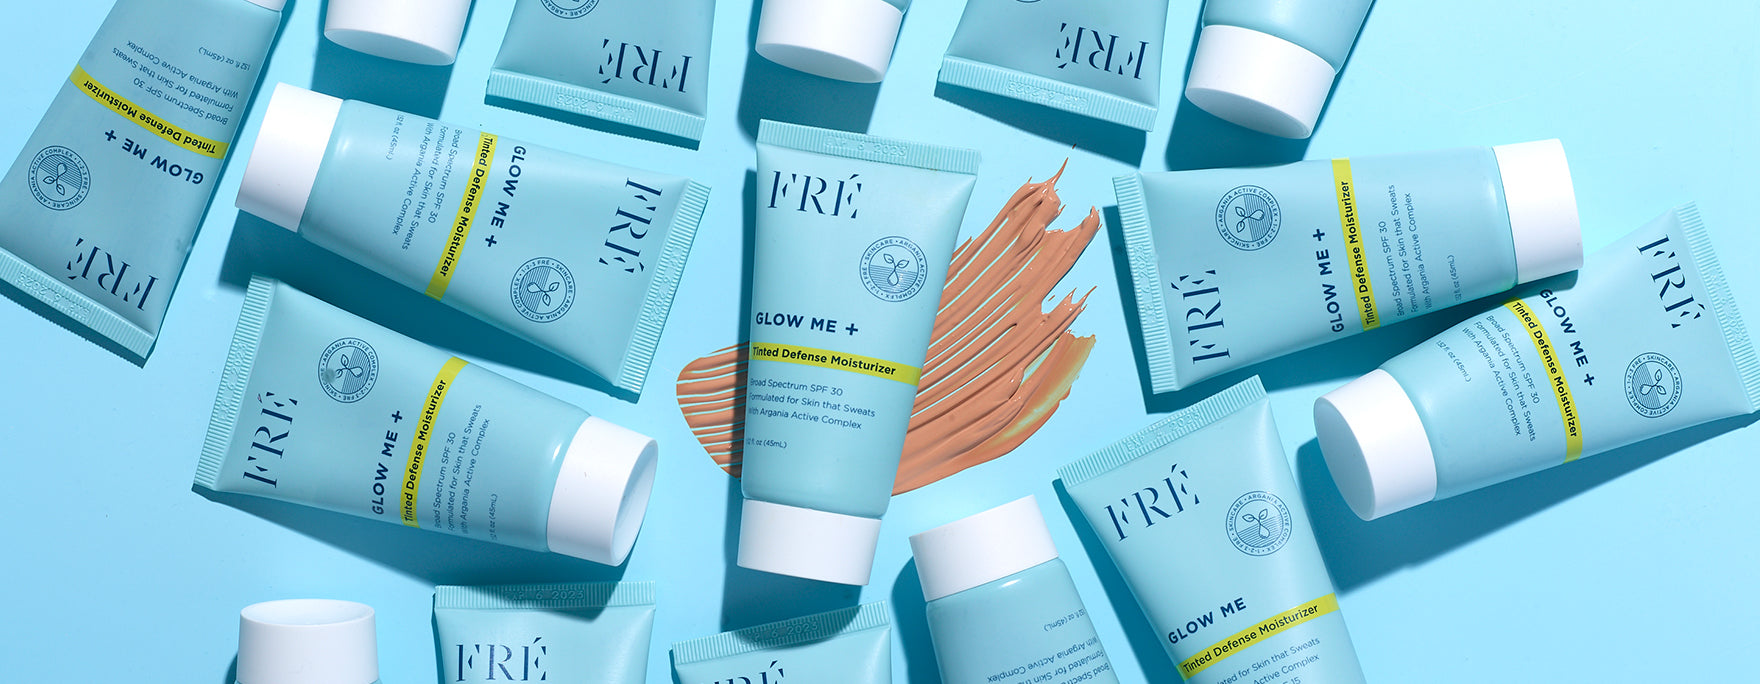 Meet the New GLOW ME +, the Revolutionary SPF30 Tinted Moisturizer